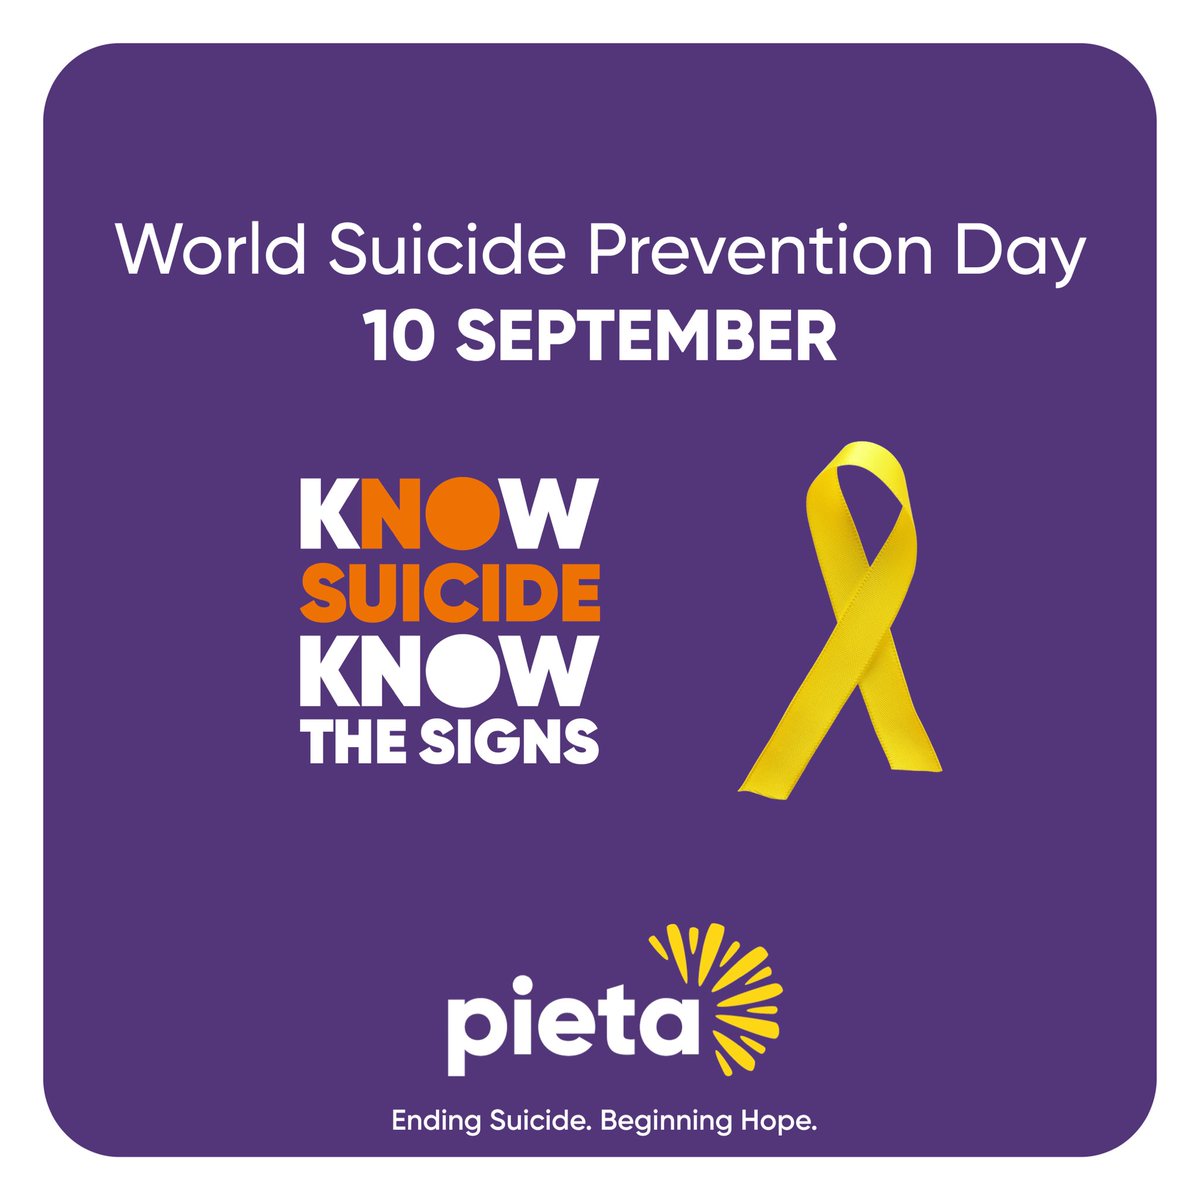 Please call our Freephone 24/7 Crisis Helpline on 1800 247 247 or text HELP to 51444*  #WSPD2020    #WSPD    #SuicideSignsPieta  (*std msg rates apply).